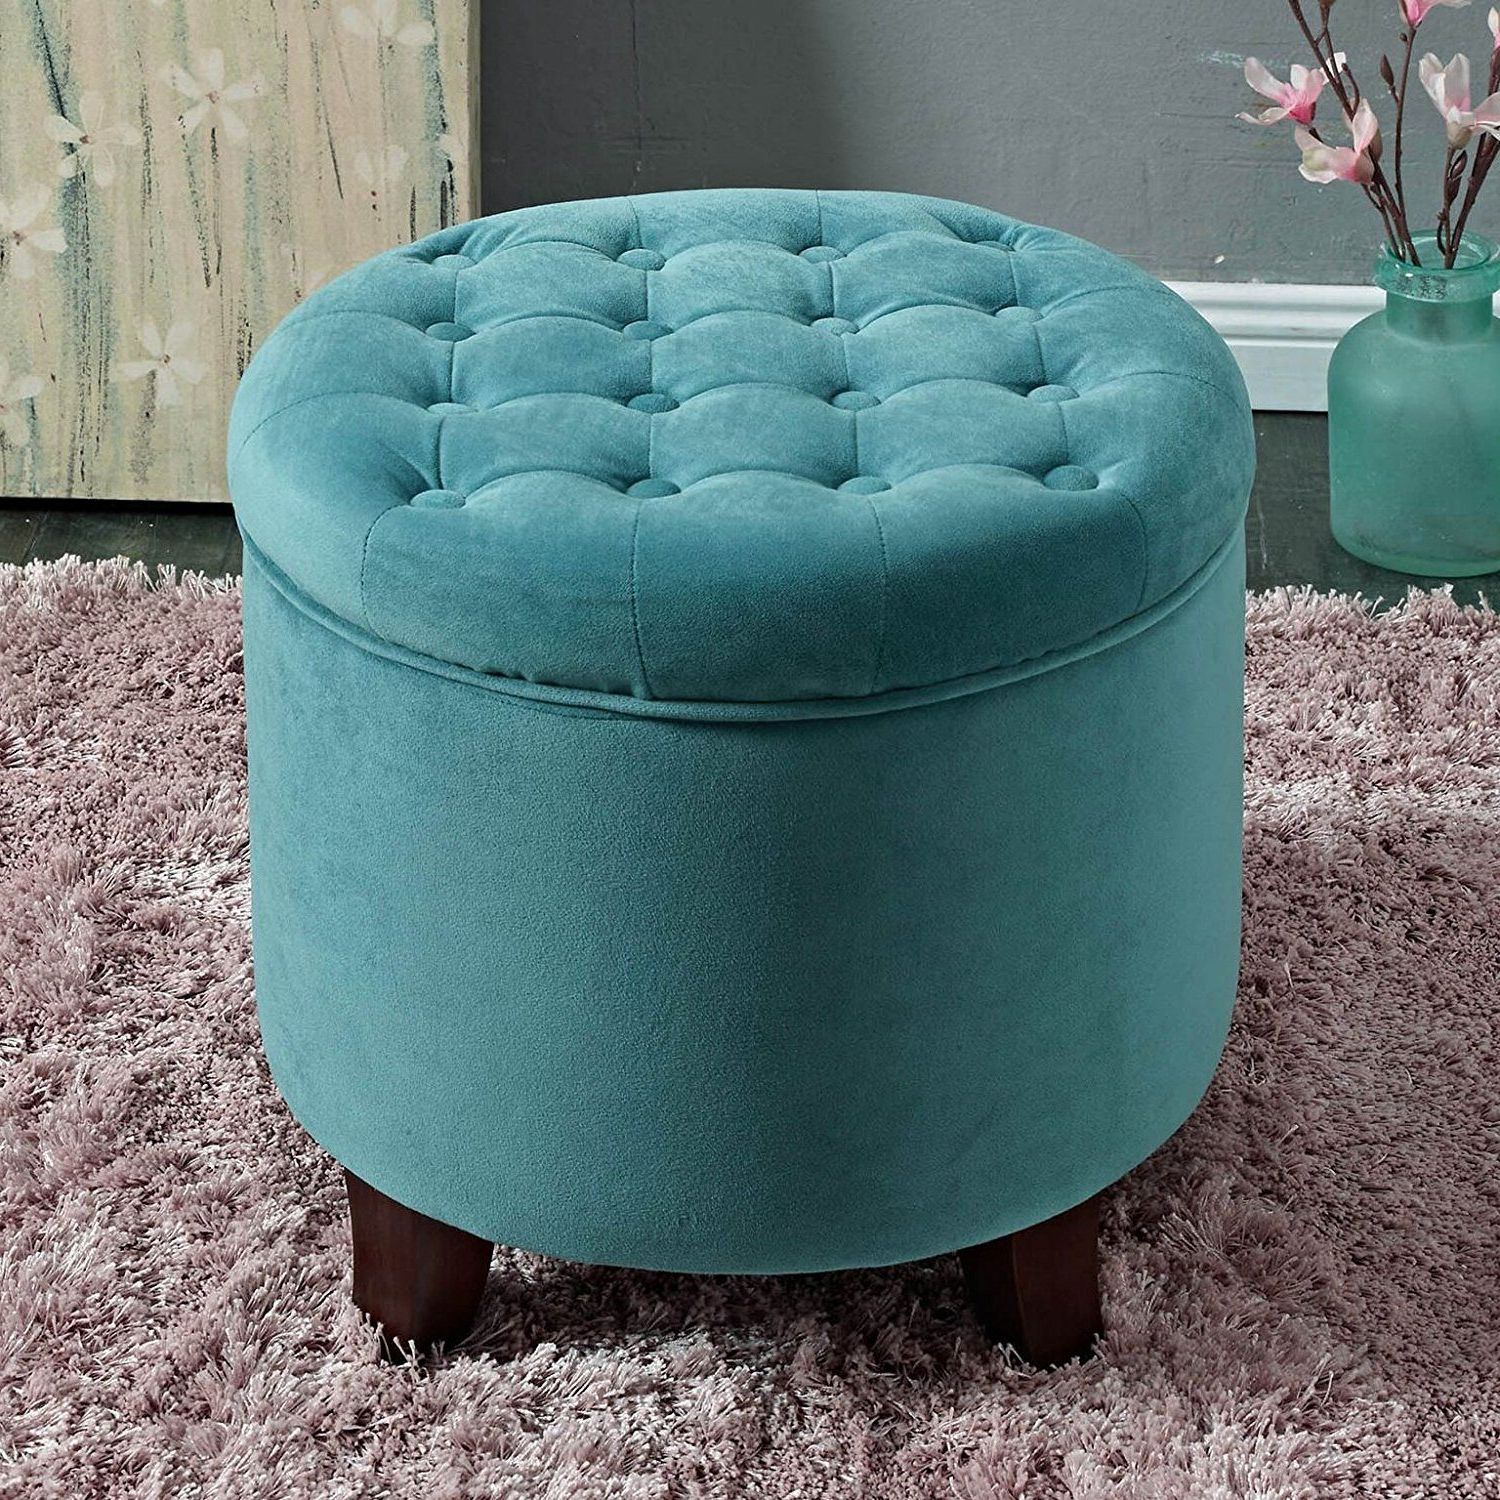 Most Current Amazon: Kinfine Velvet Tufted Round Storage Ottoman With Removable In Velvet Tufted Storage Ottomans (View 1 of 10)